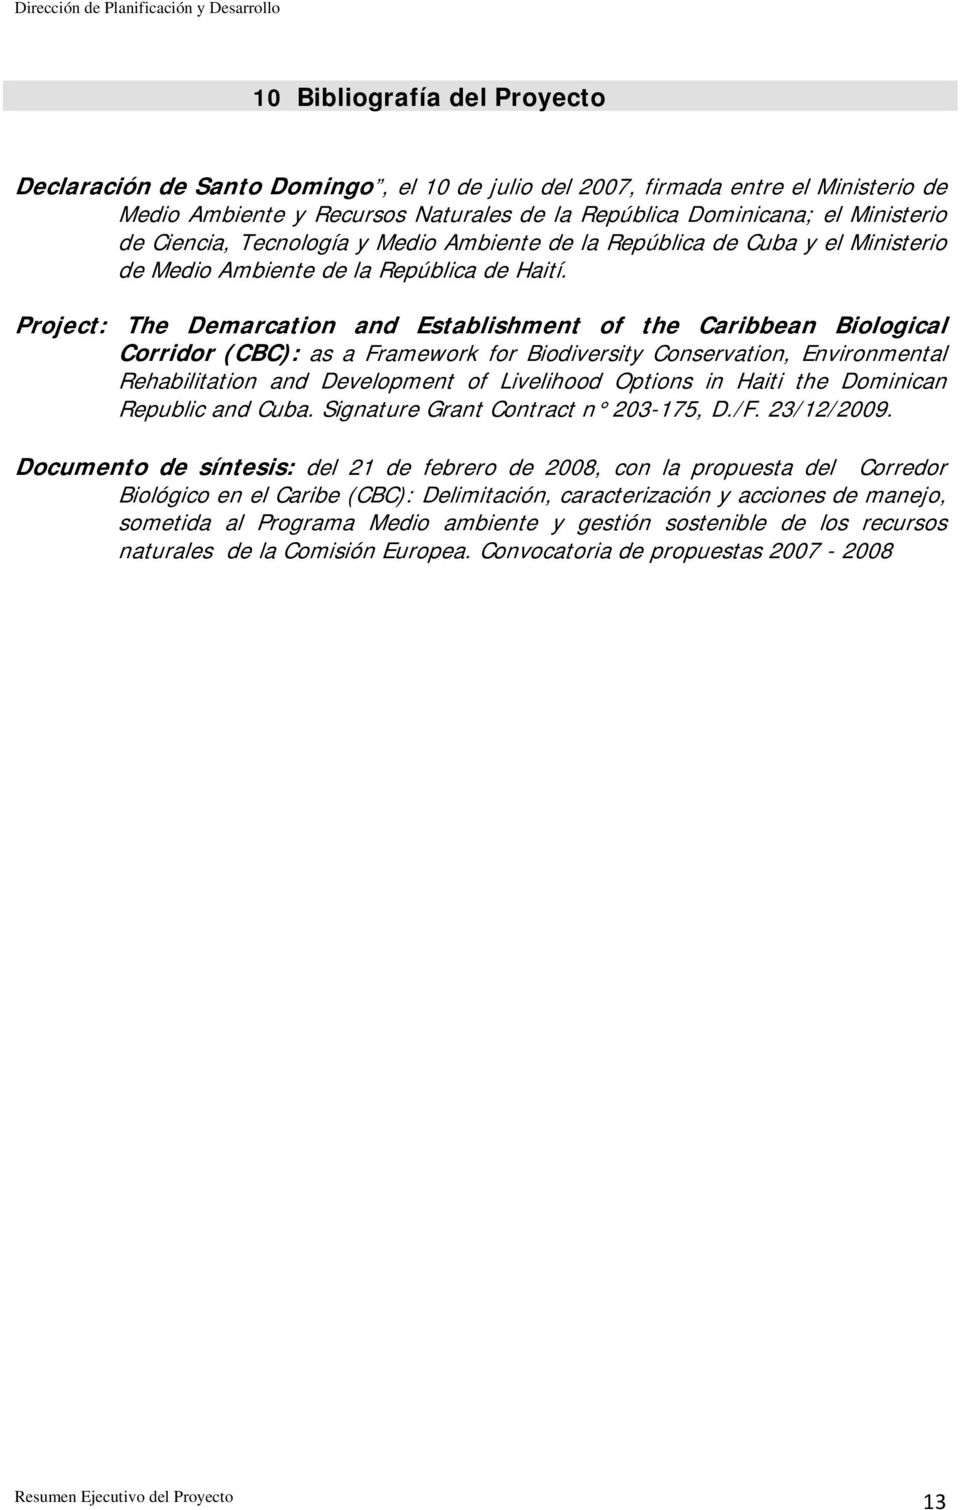 Project: The Demarcation and Establishment of the Caribbean Biological Corridor (CBC): as a Framework for Biodiversity Conservation, Environmental Rehabilitation and Development of Livelihood Options